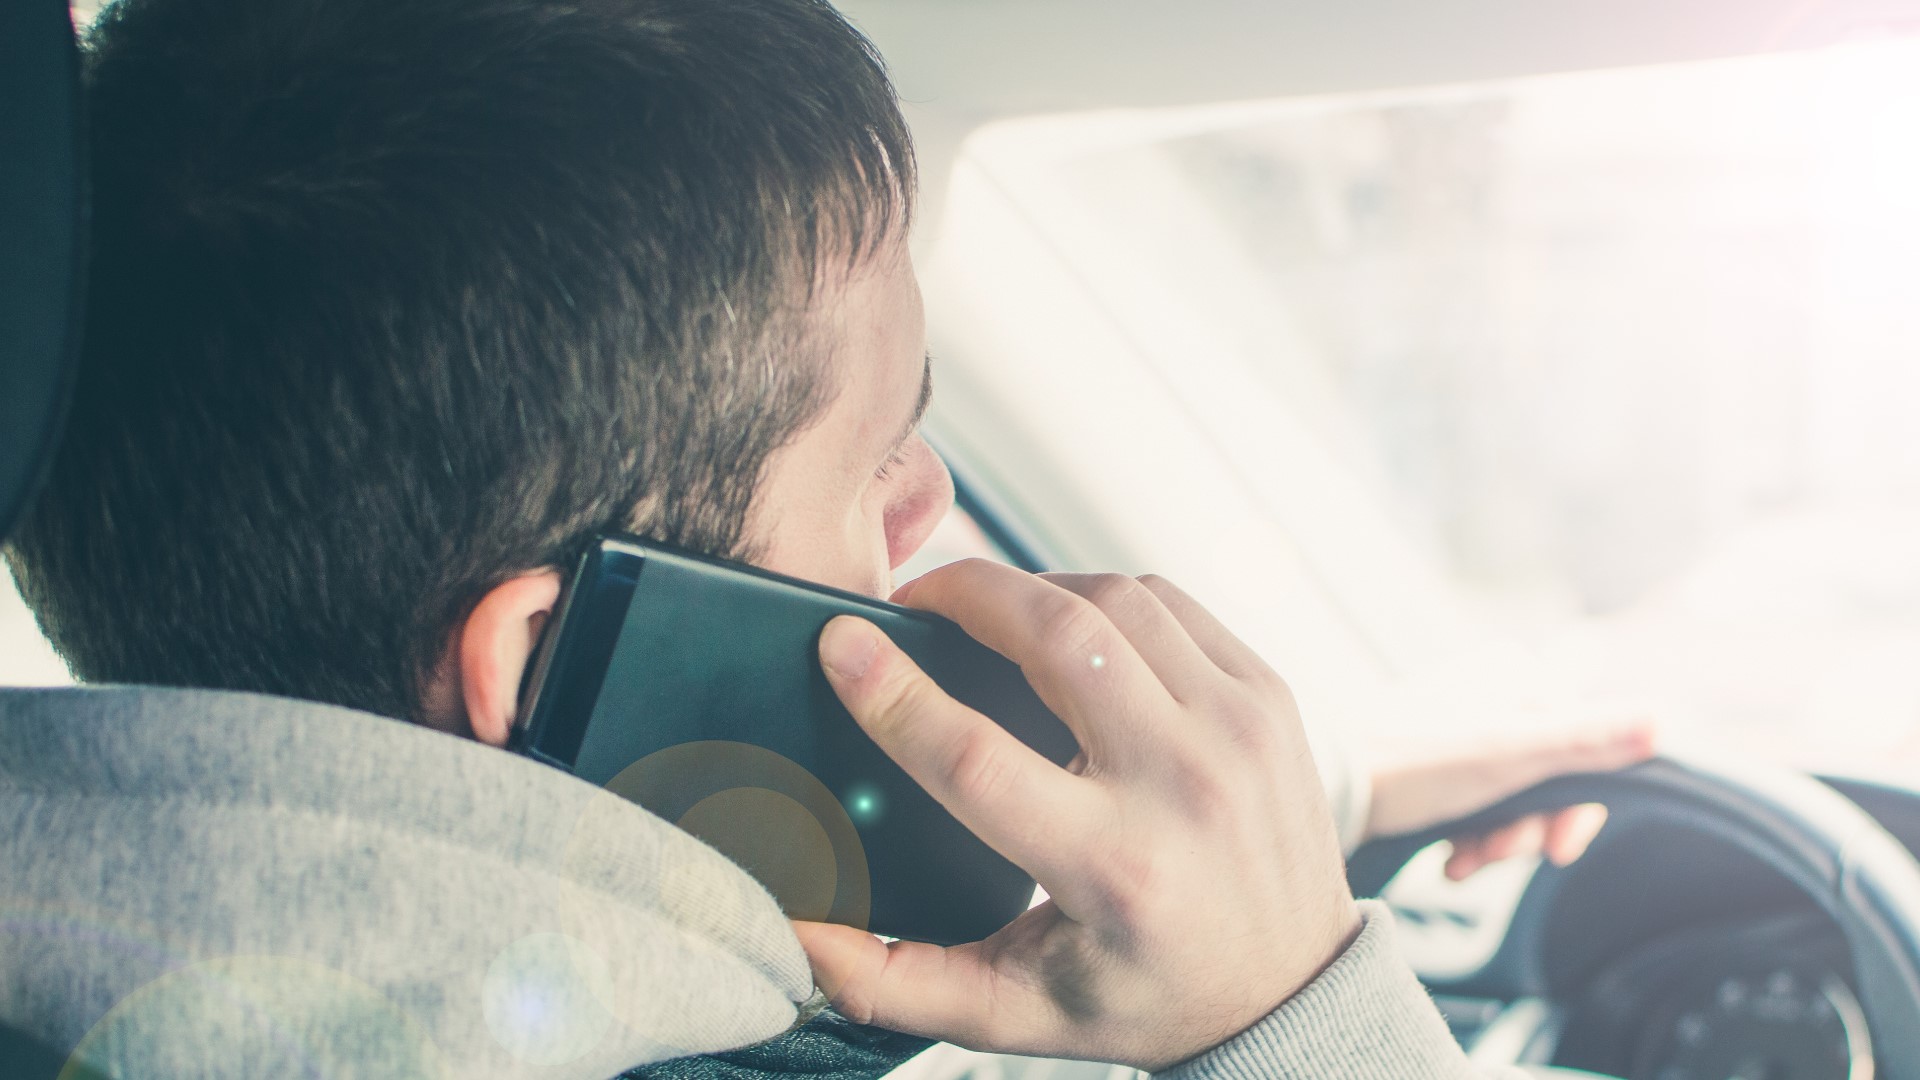 AAA says hands-free does not mean distraction free, and while the new law is a positive step, it's not a sure-all for distracted driving.